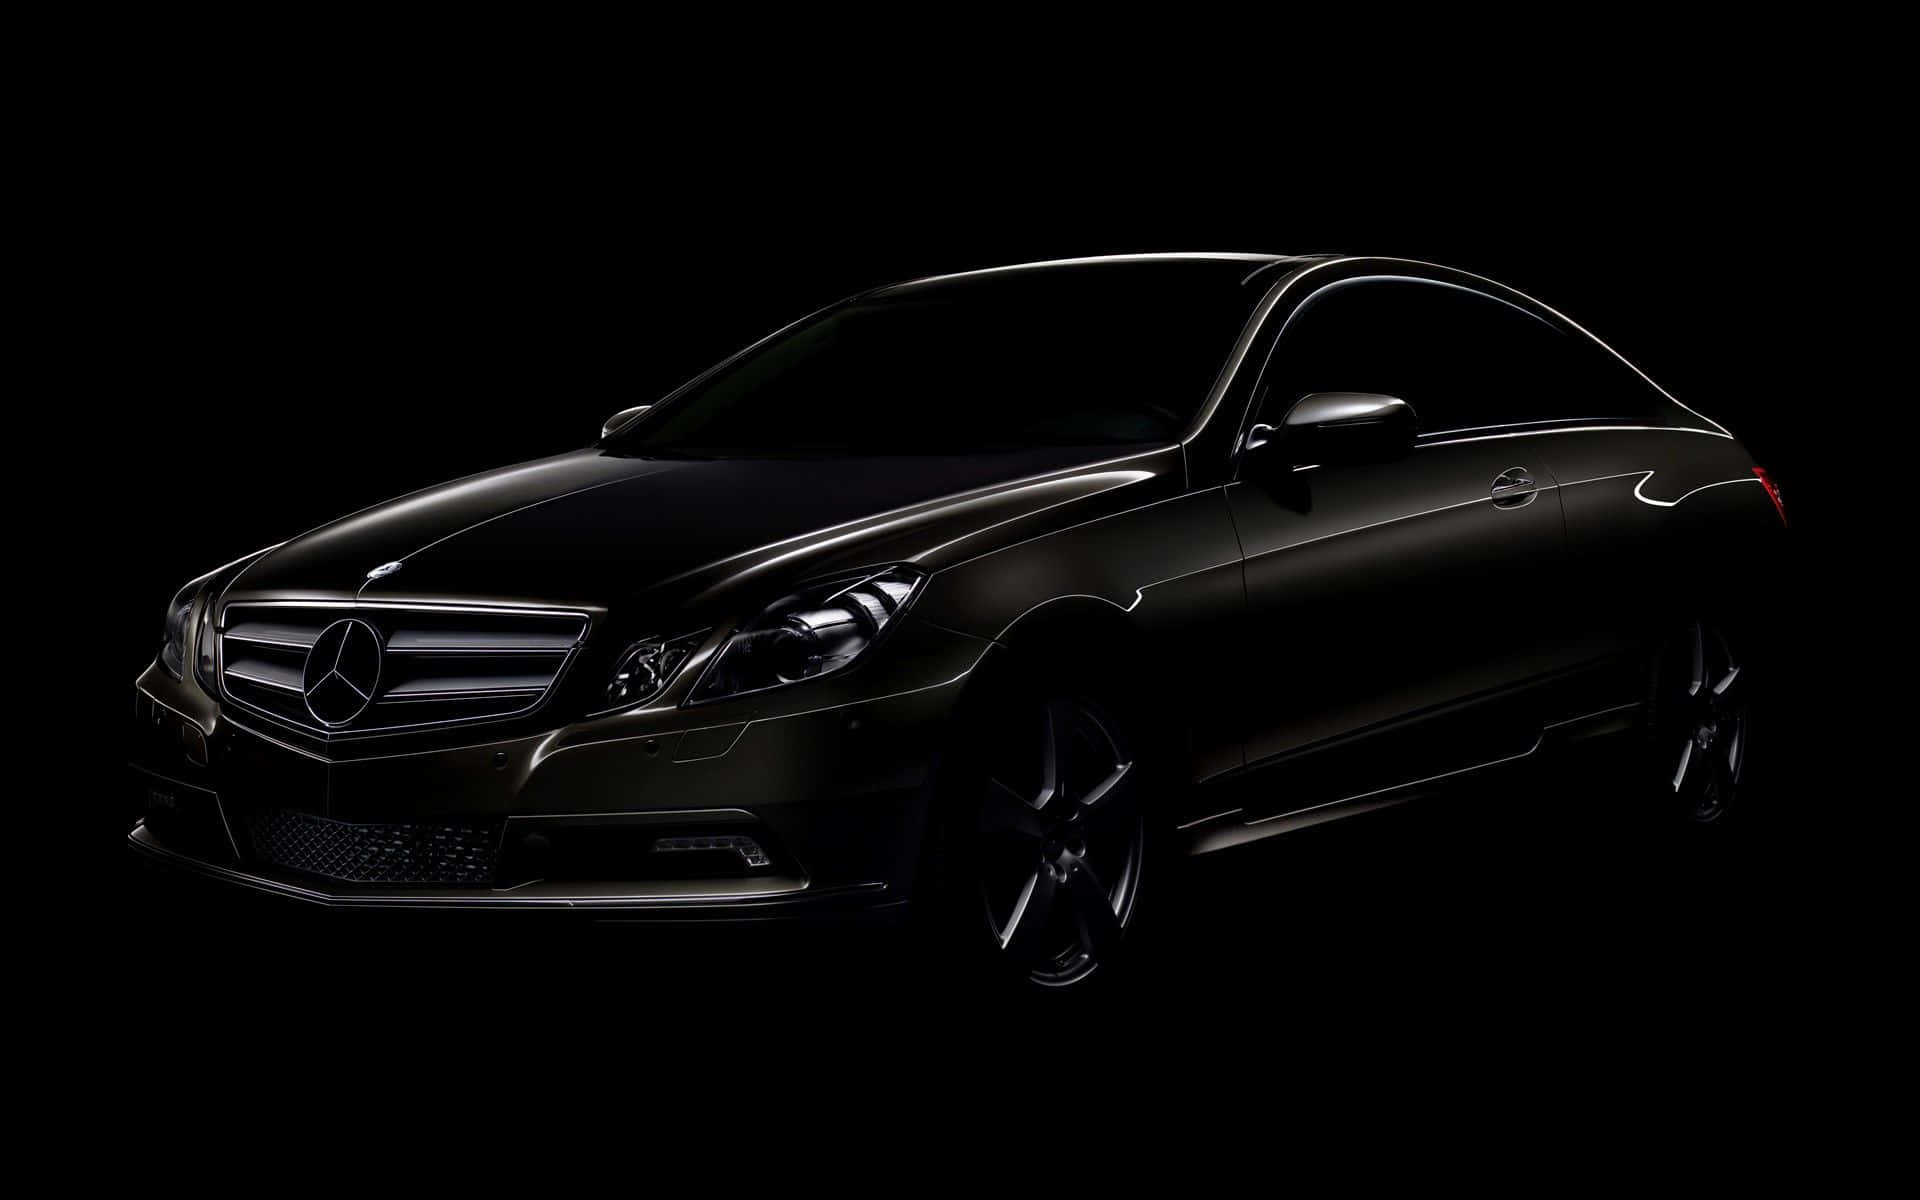 Reaching New Heights in Luxury - the Mercedes Black Wallpaper